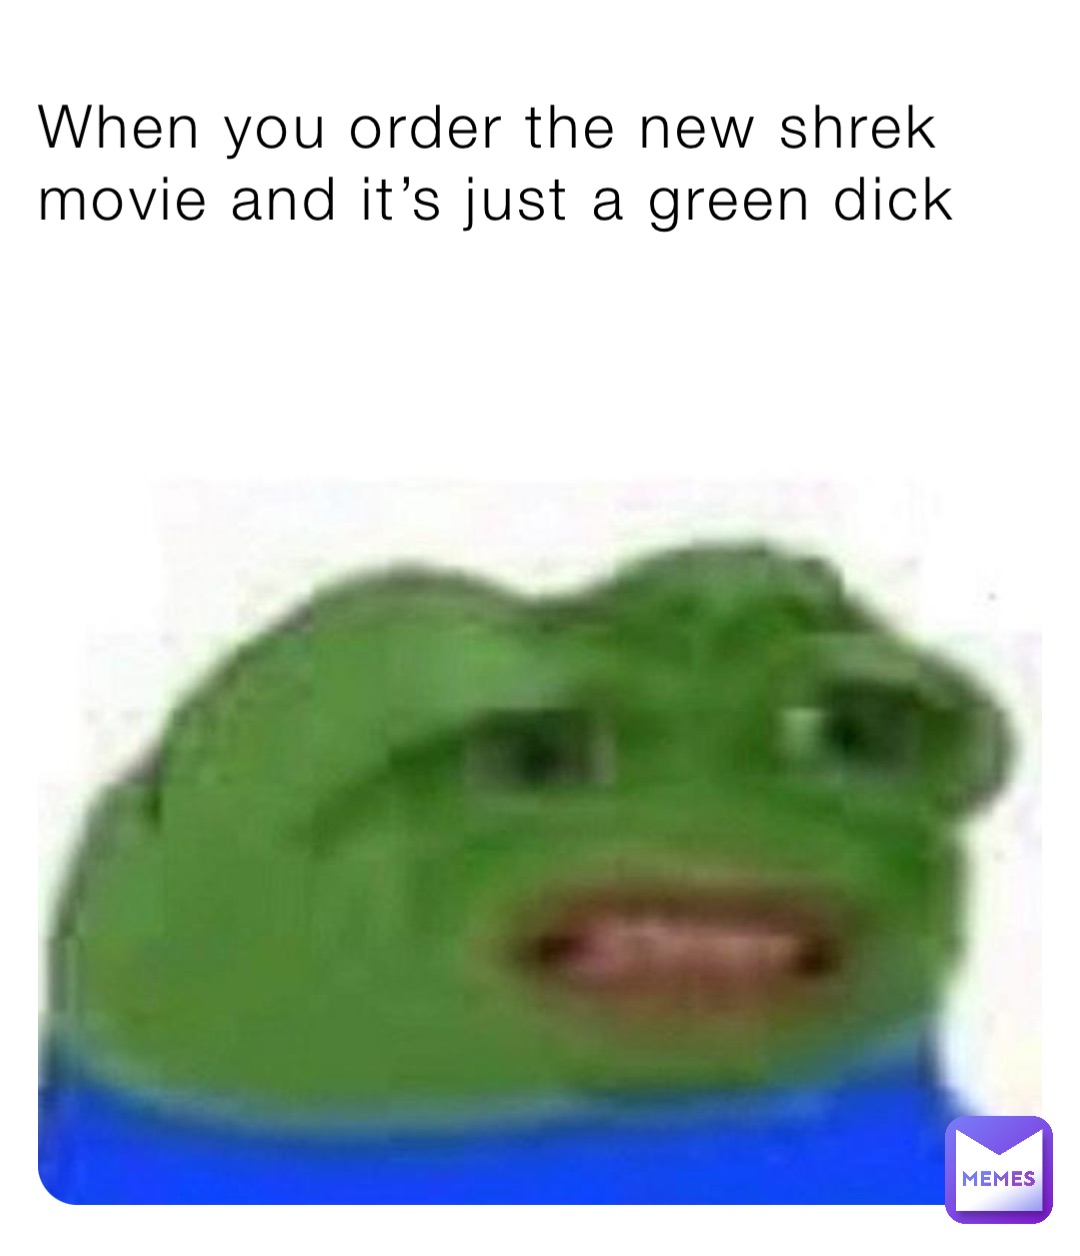 When you order the new shrek movie and it’s just a green dick